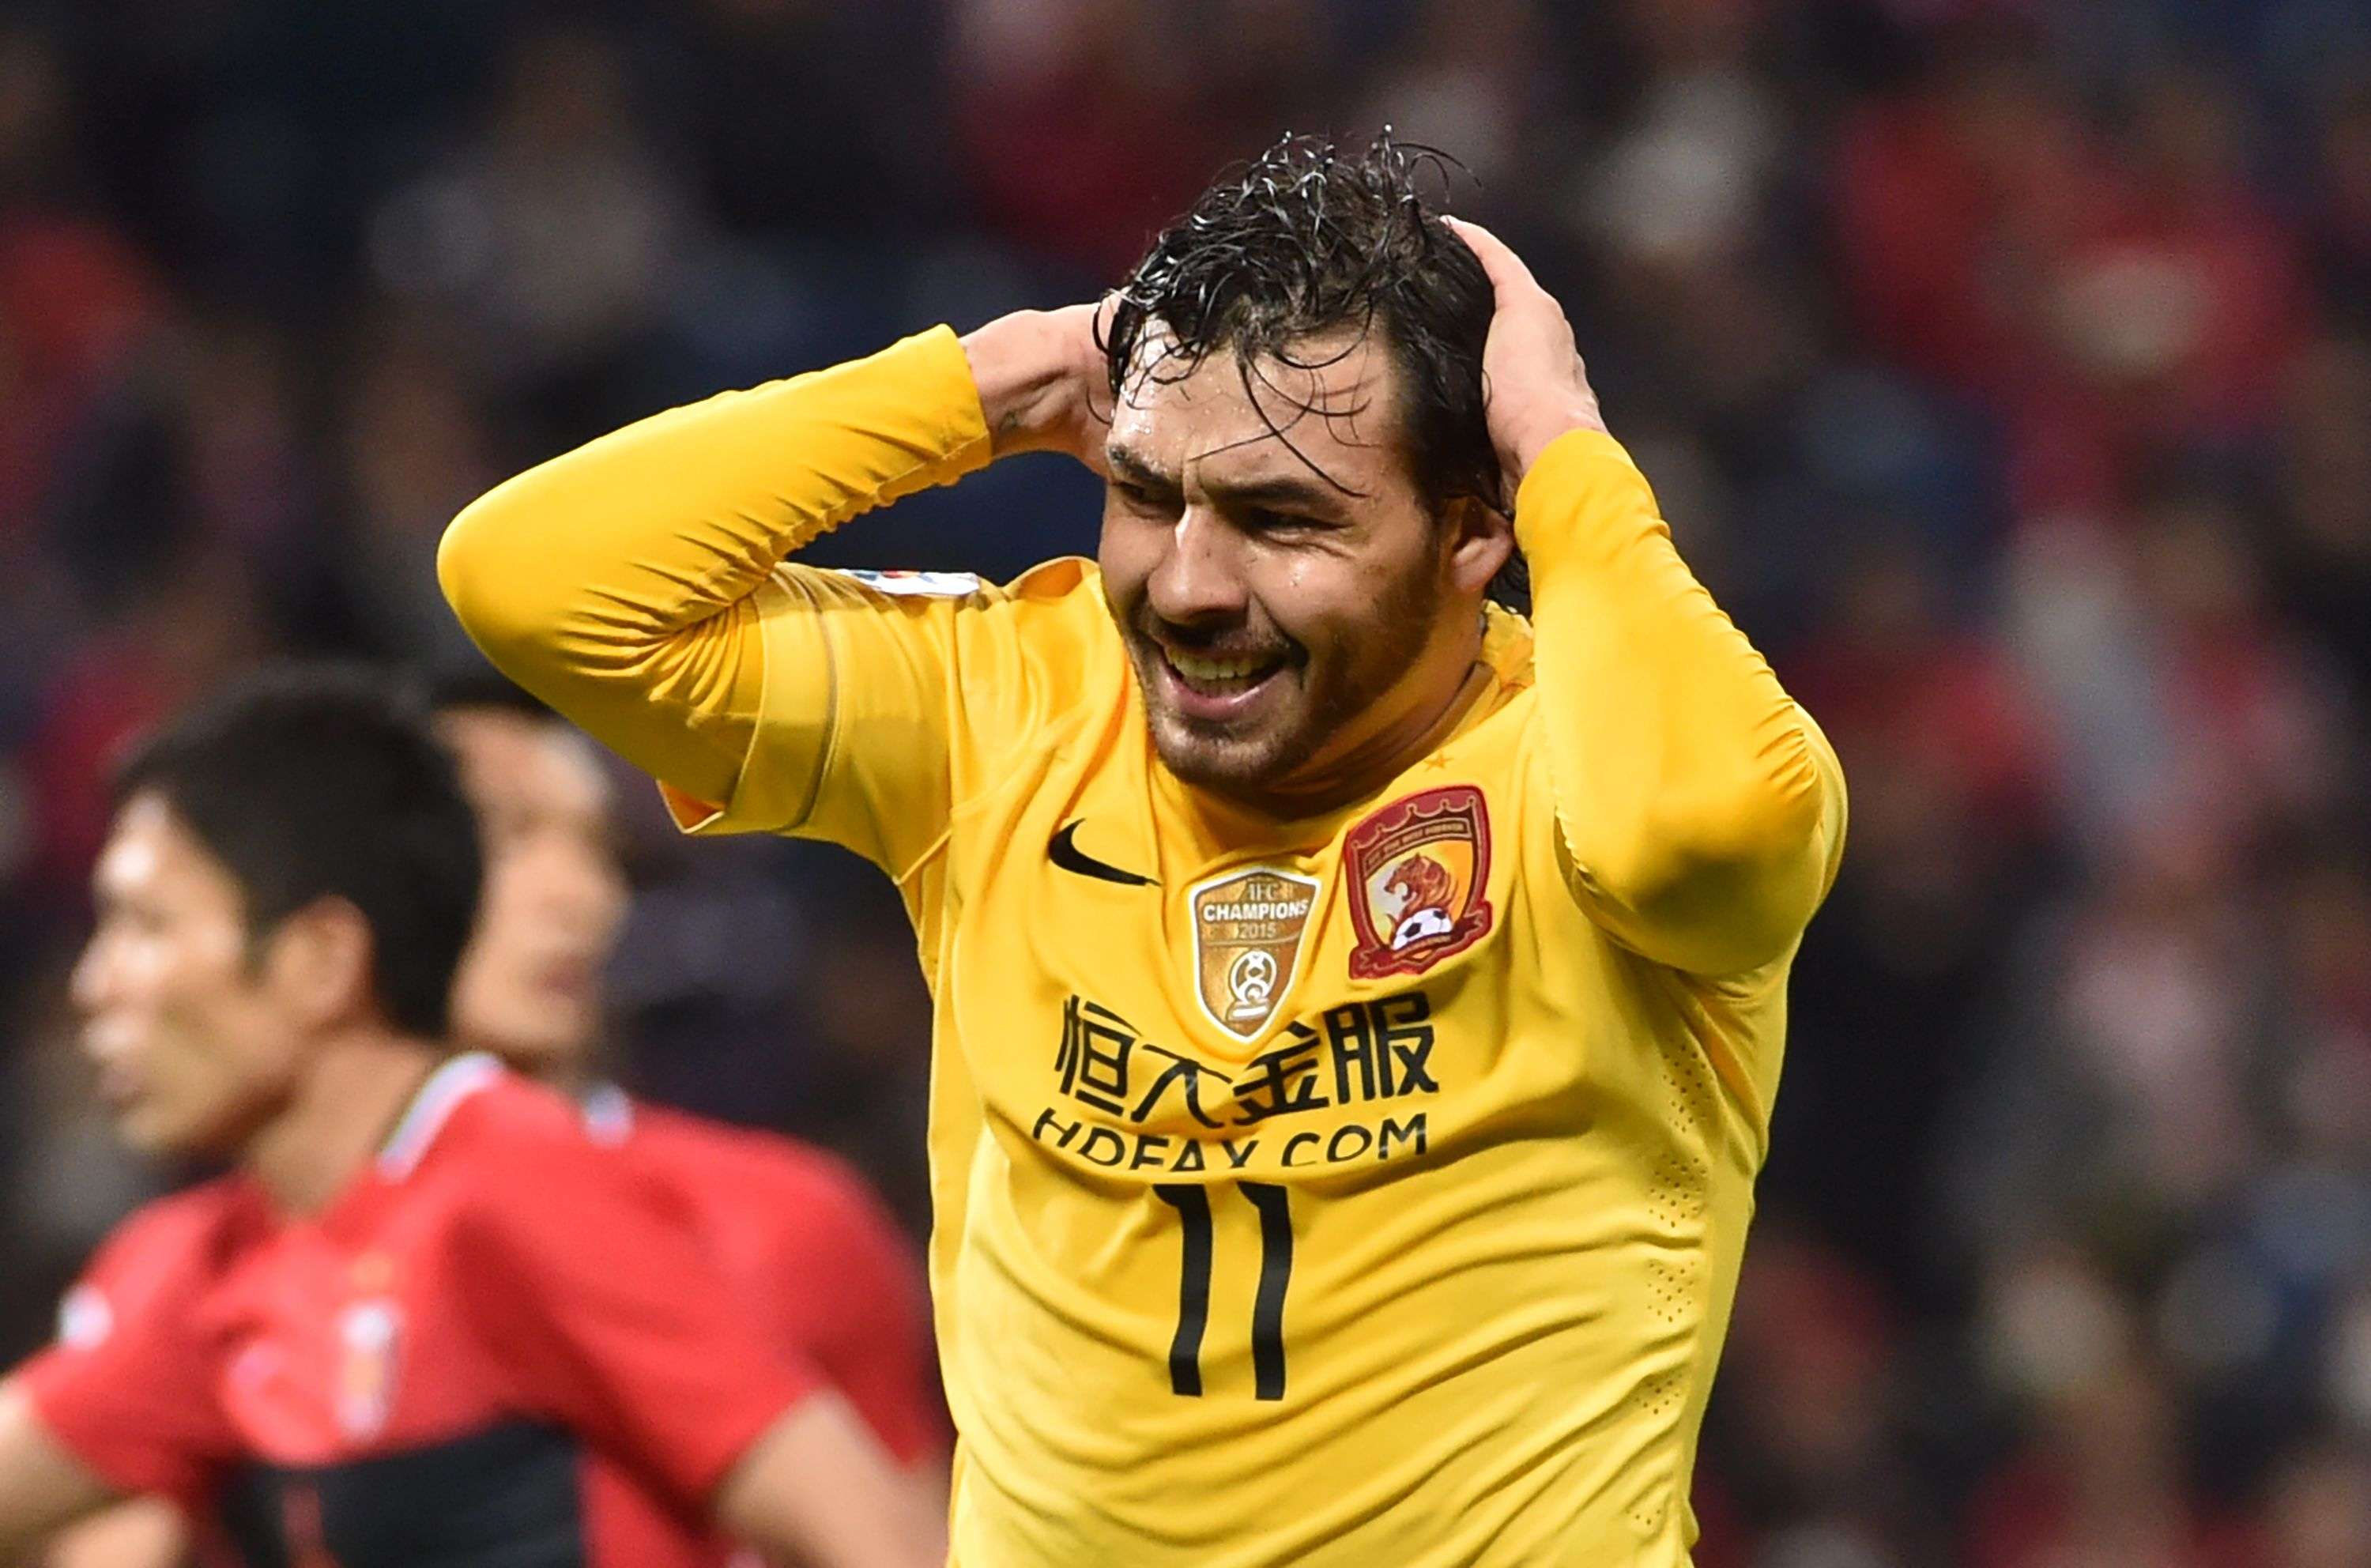 Guangzhou Evergrande, the defending champions, will not progress from the first round after a draw between Urawa Reds and Sydney FC left them mathematically unable to qualify. Photo: AFP